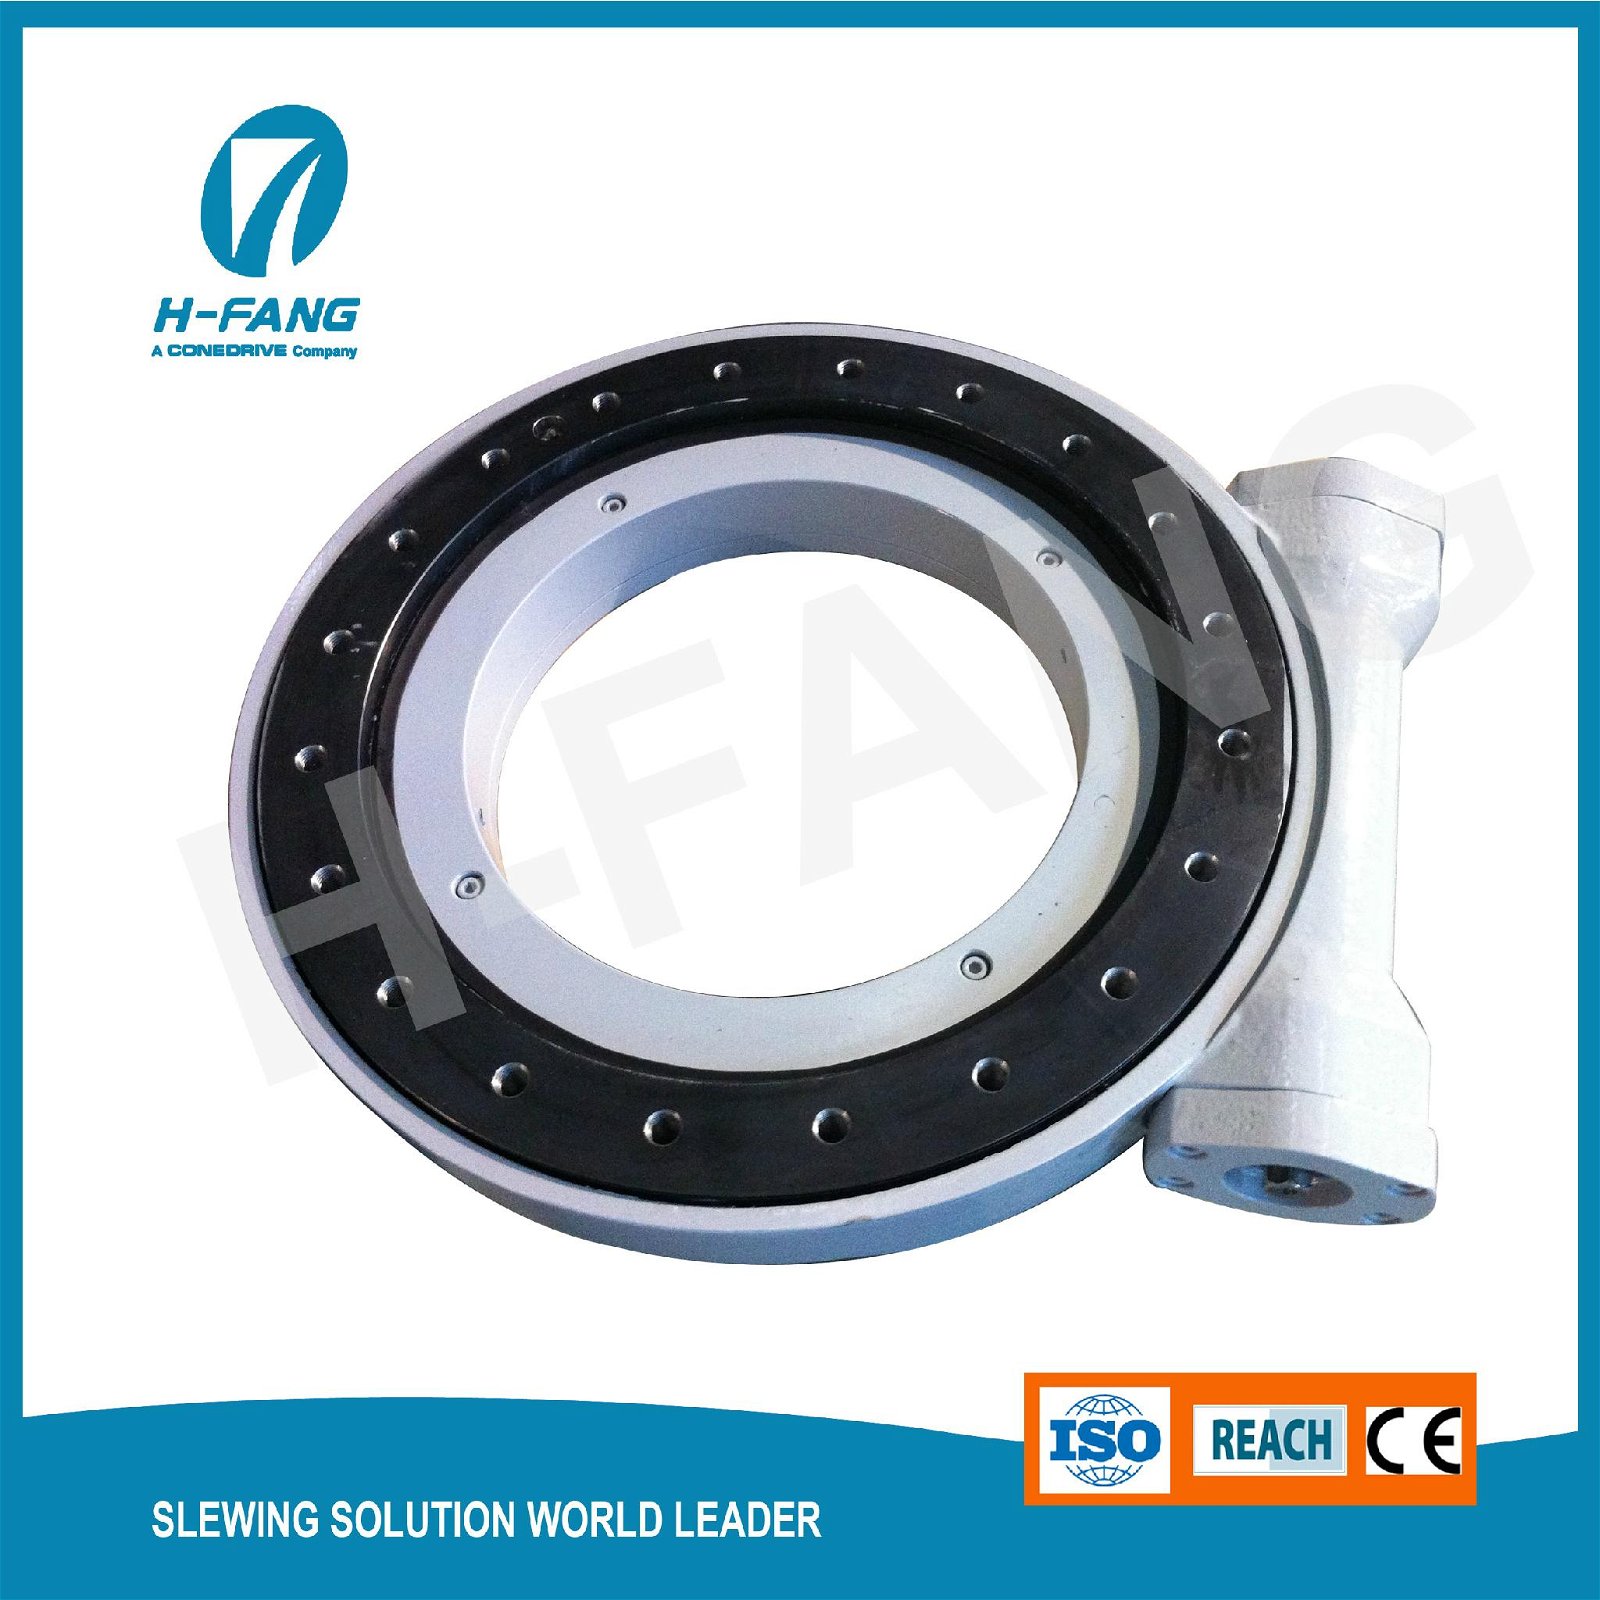 17'' Worm Drive for Aerial Working Platform